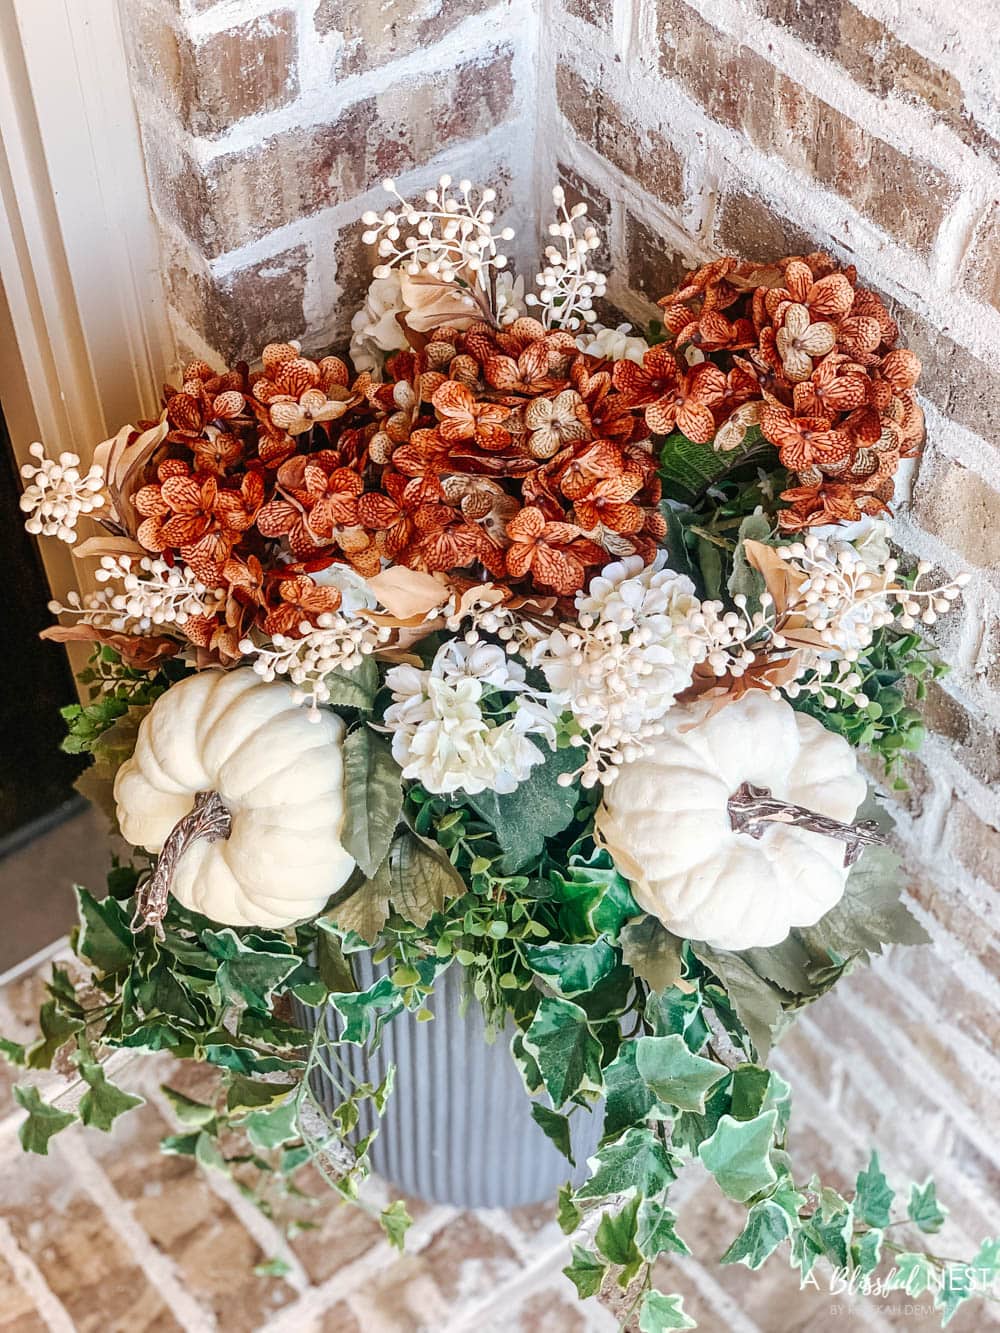 A small fall porch makeover with affordable finds from pumpkins, lanterns, fall wreath, and more. #ABlissfulNest #HobbyLobby #HobbyLobbyFinds #ad #fallporch #falldecor